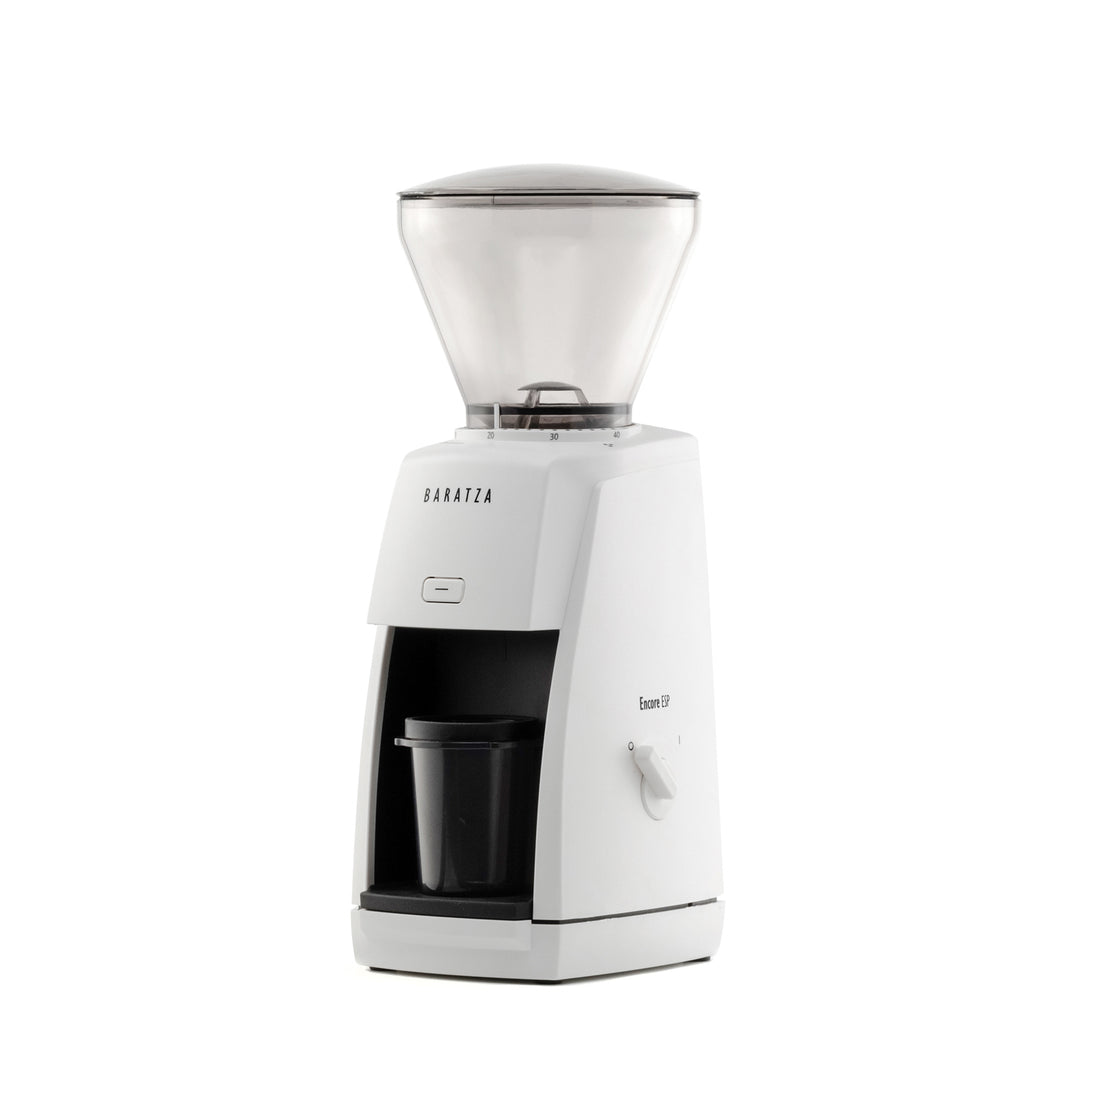 Baratza Encore review: This coffee grinder makes gourmet grounds